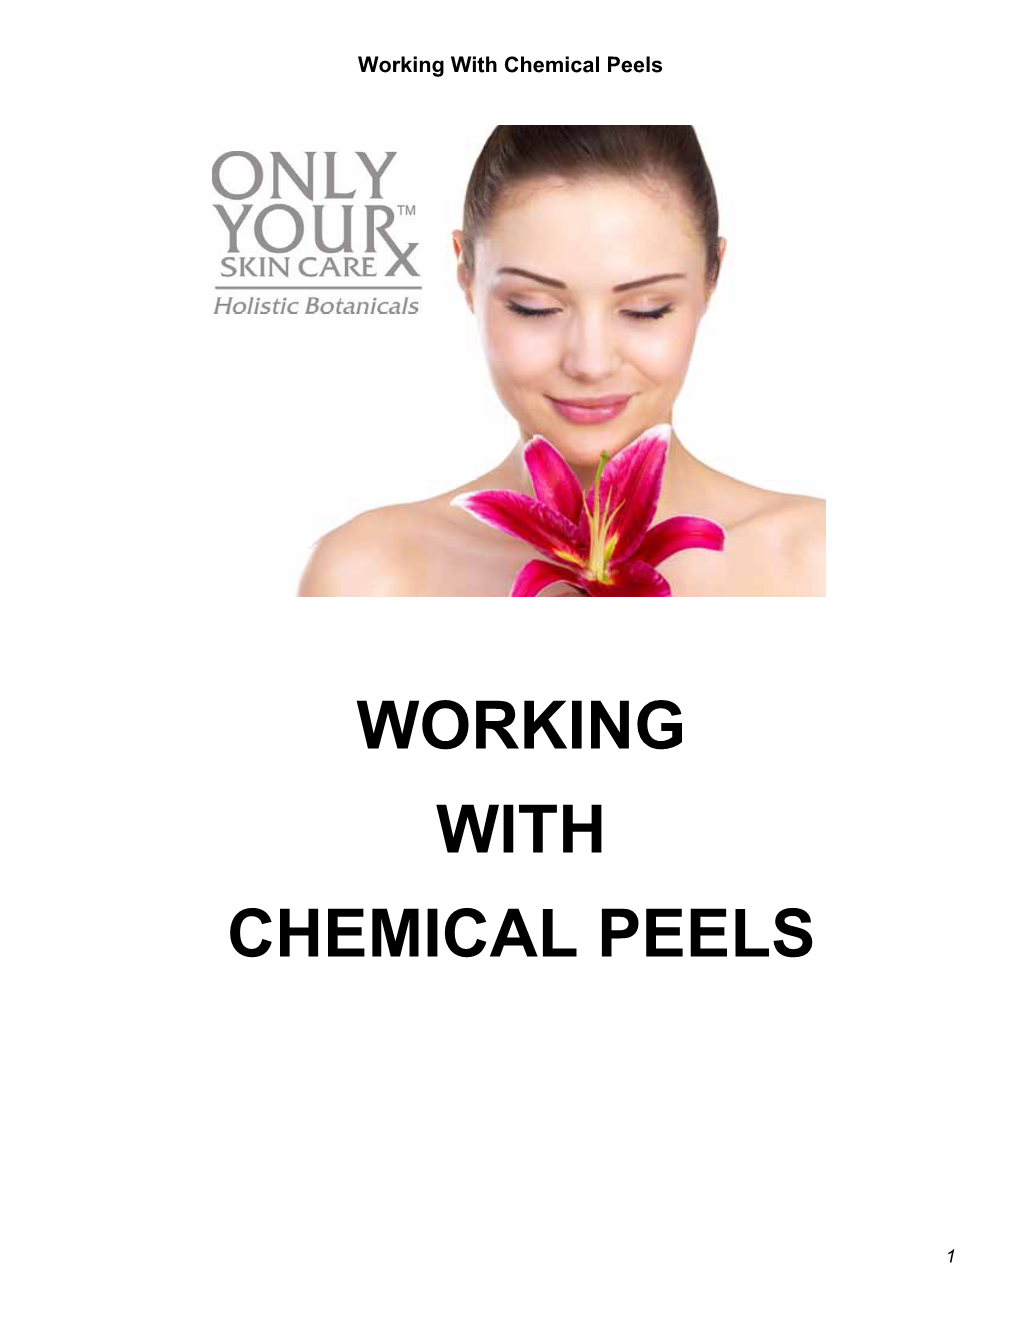 Working with Chemical Peels